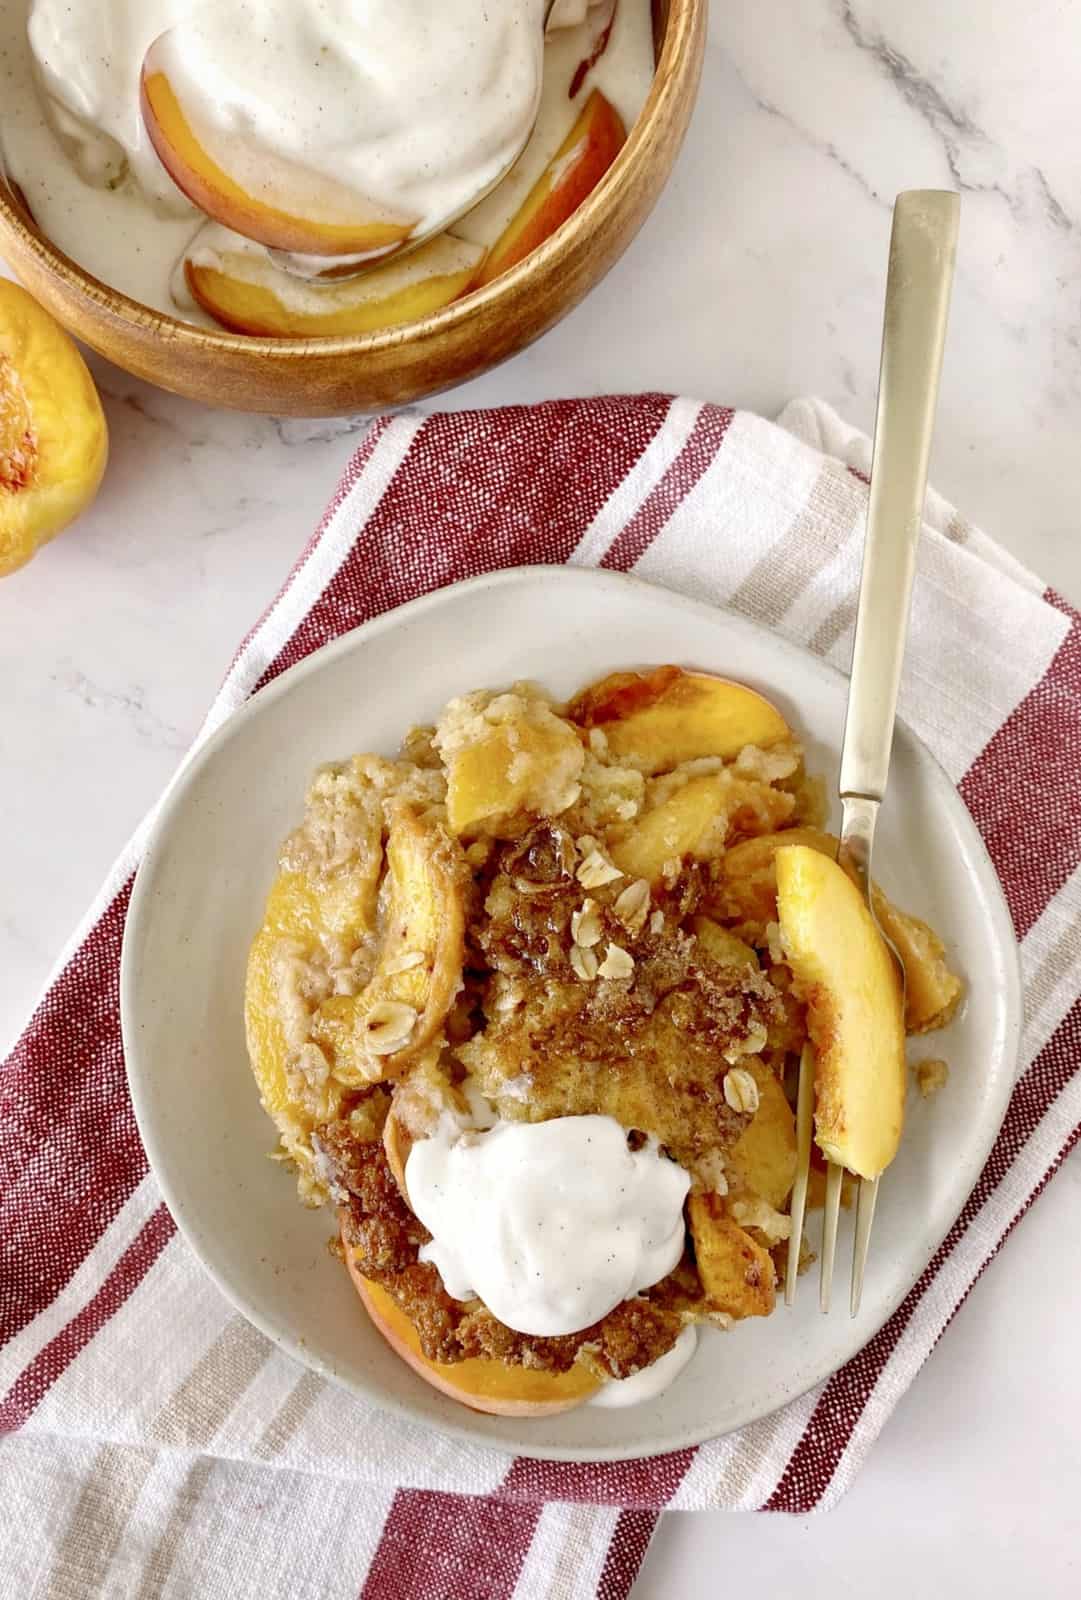 dish of peach cobbler with ice cream on top